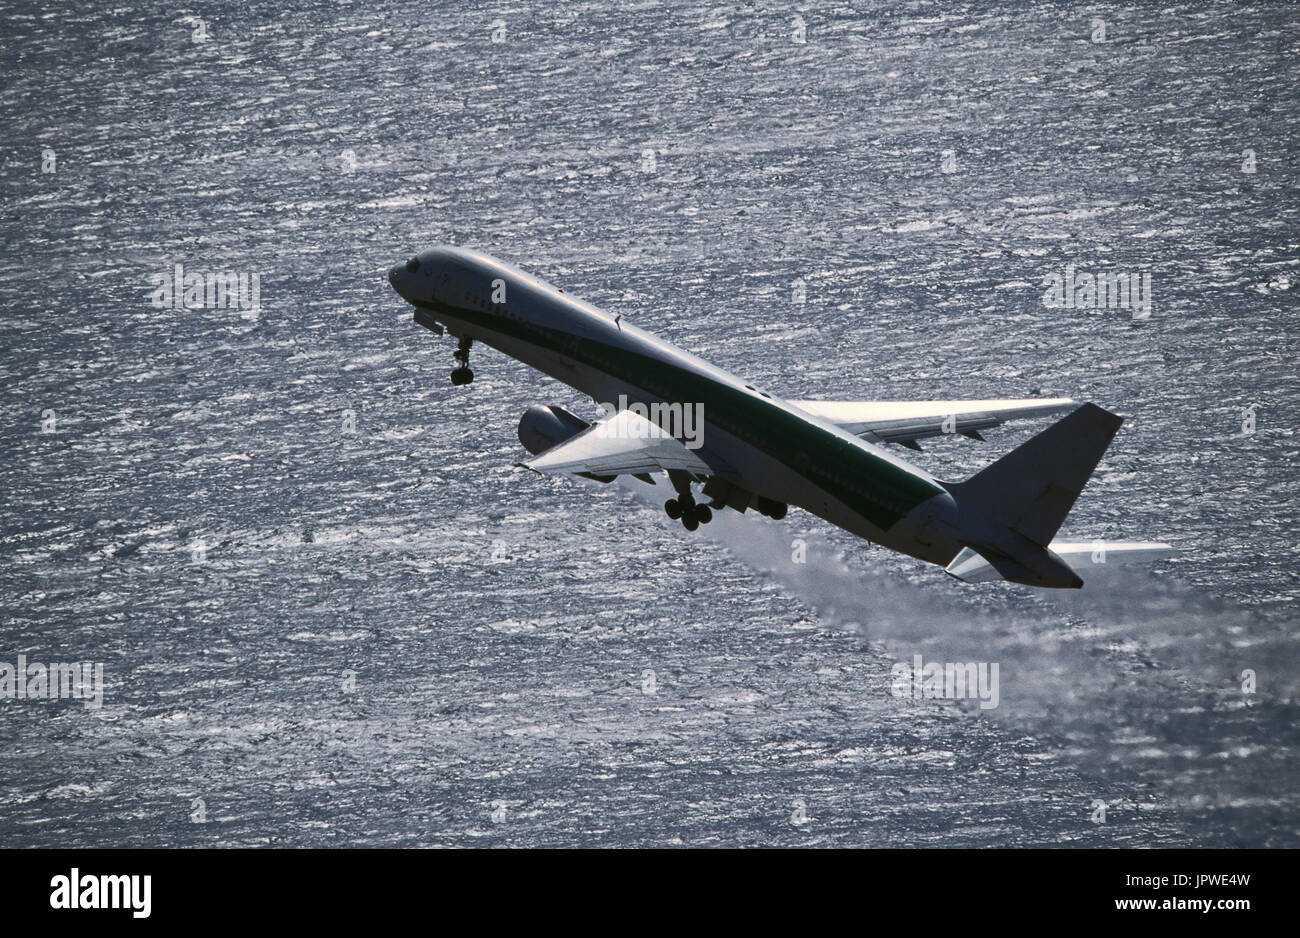 Boeing 757-200 climbing out after take-off over the sea with jet-exhaust visible from the engines and undercarriage retracting Stock Photo